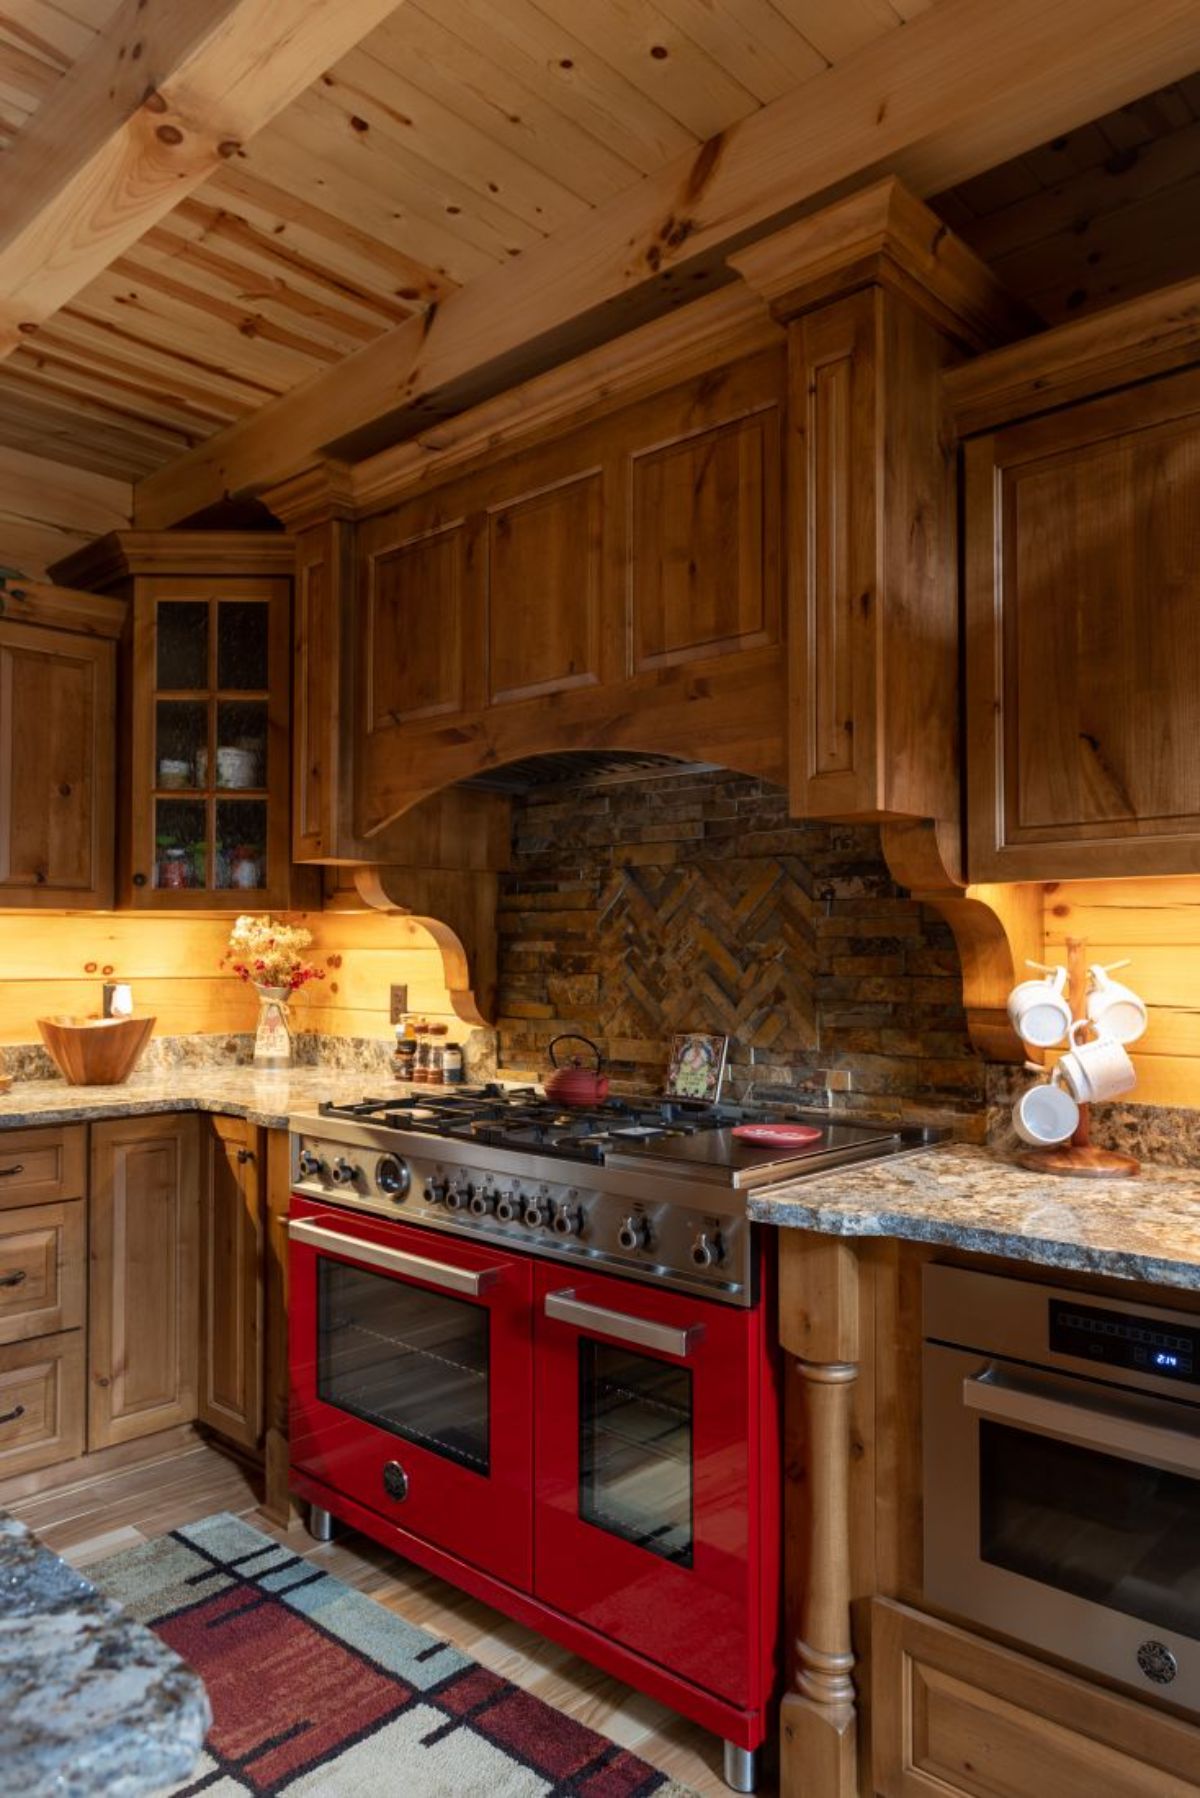 red gas stove in kitchen with rustic wood backsplash